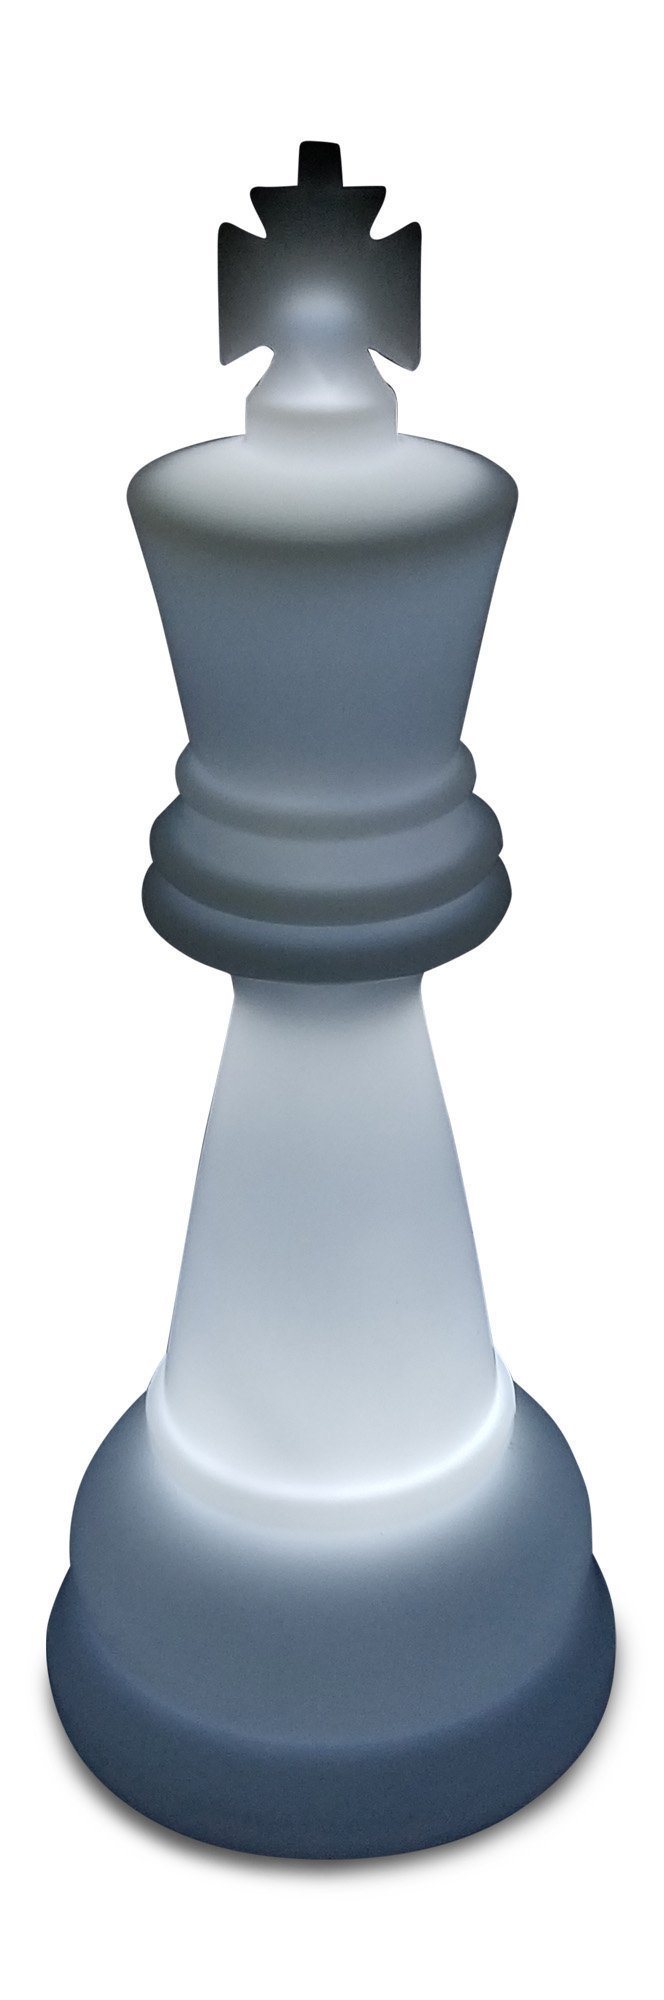 48-Inch Perfect Chess Sets  Buy Personalized 48-Inch Perfect Light Up  Giant Chess Sets - MegaChess